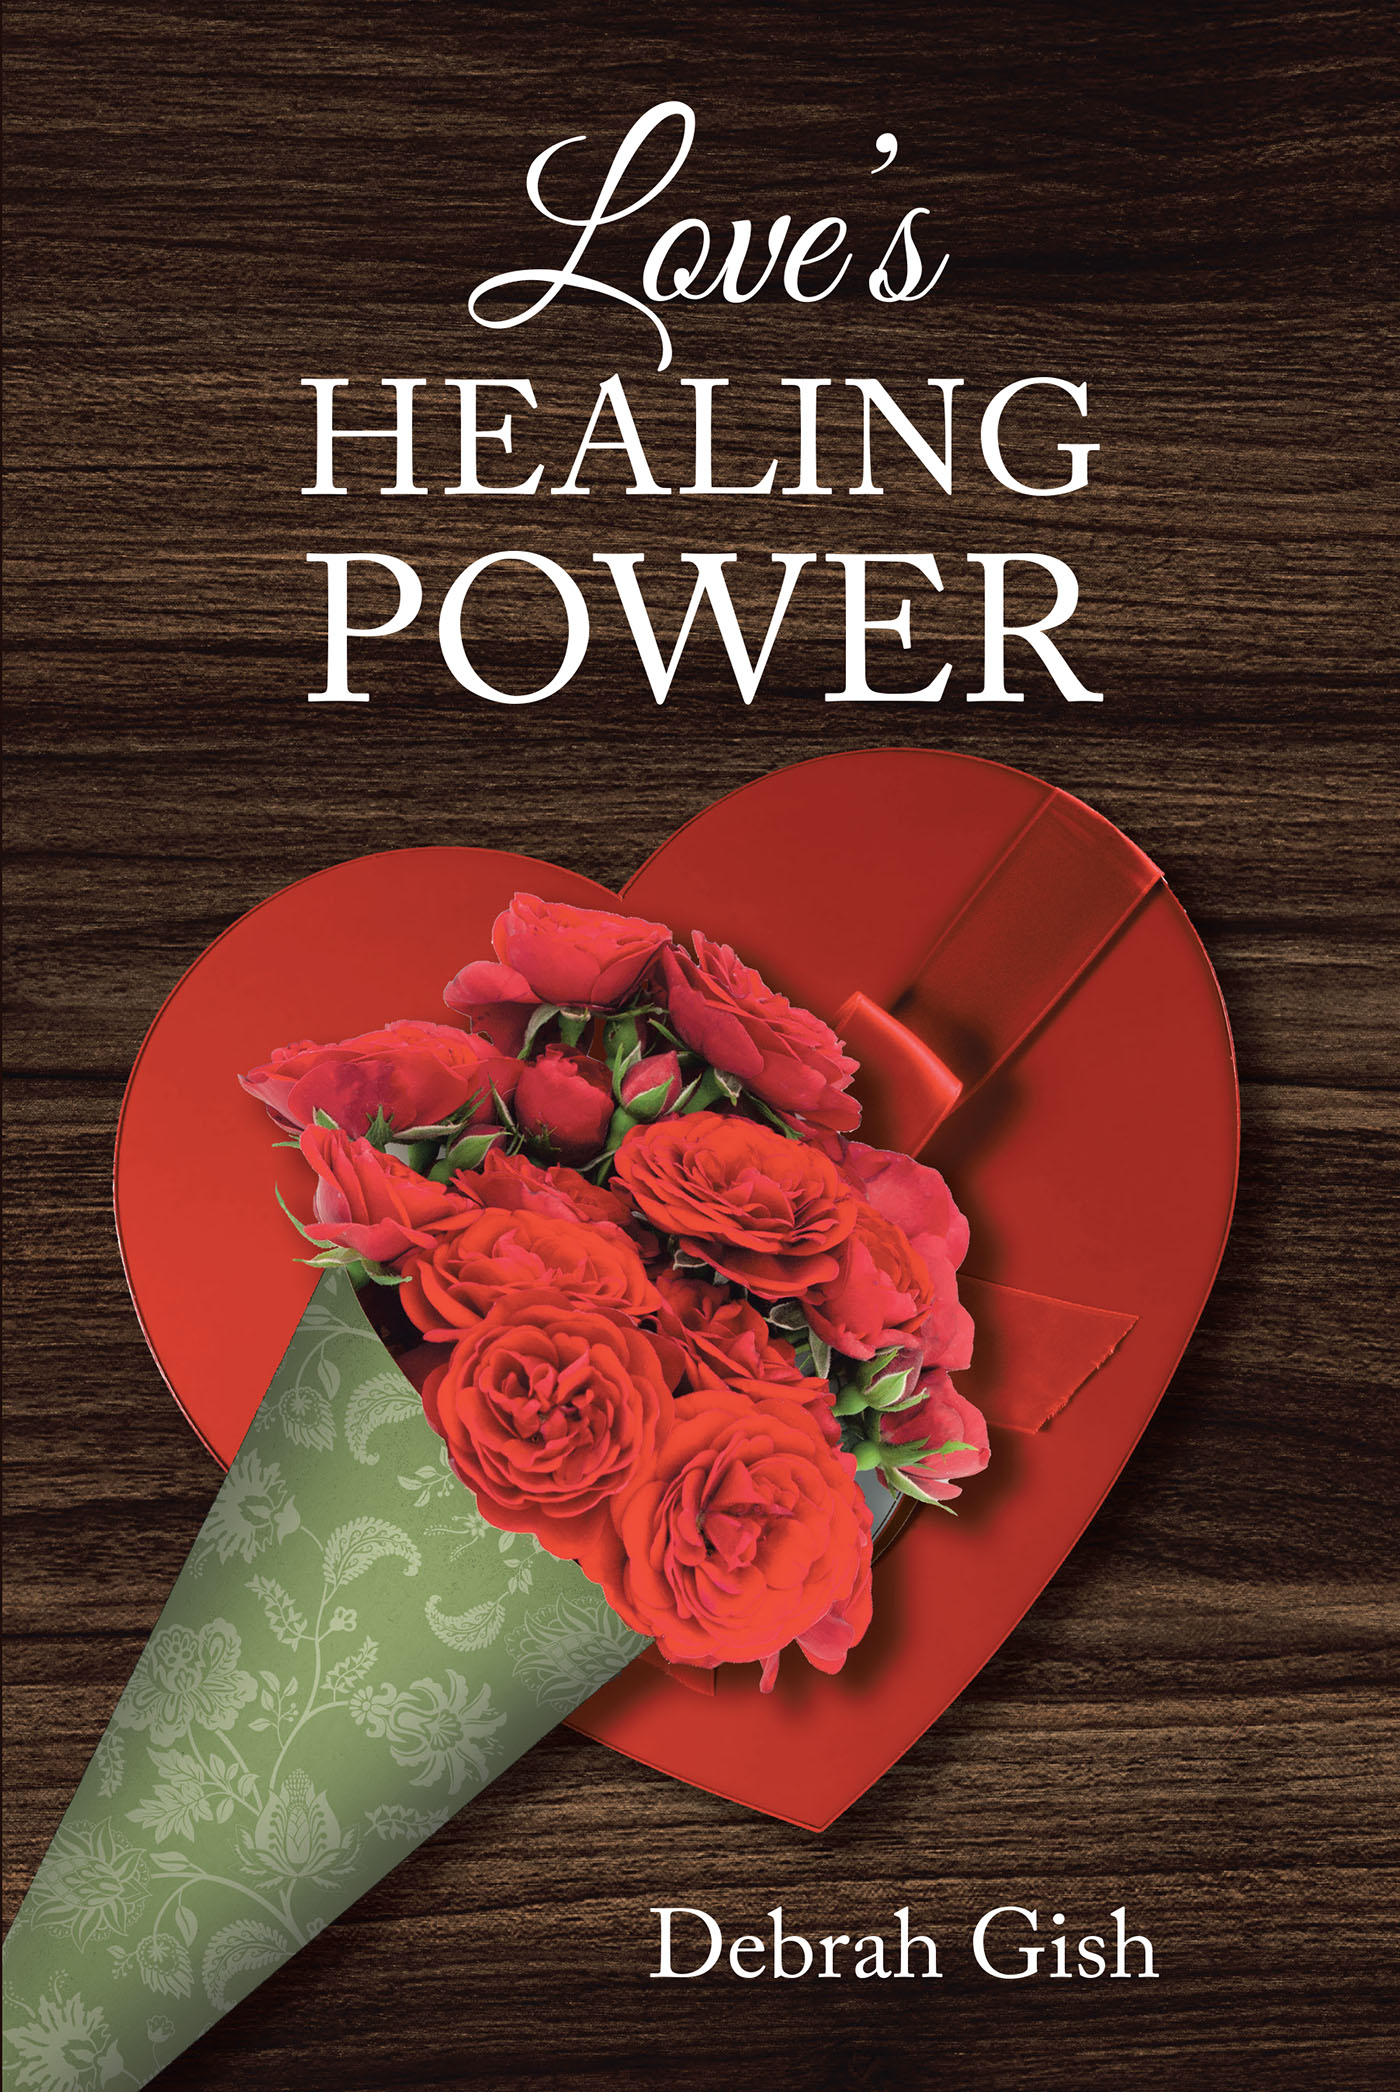 Debrah Gish’s Newly Released "Love’s Healing Power" is a Powerful Story of Love and Renewal Following a Shocking Loss